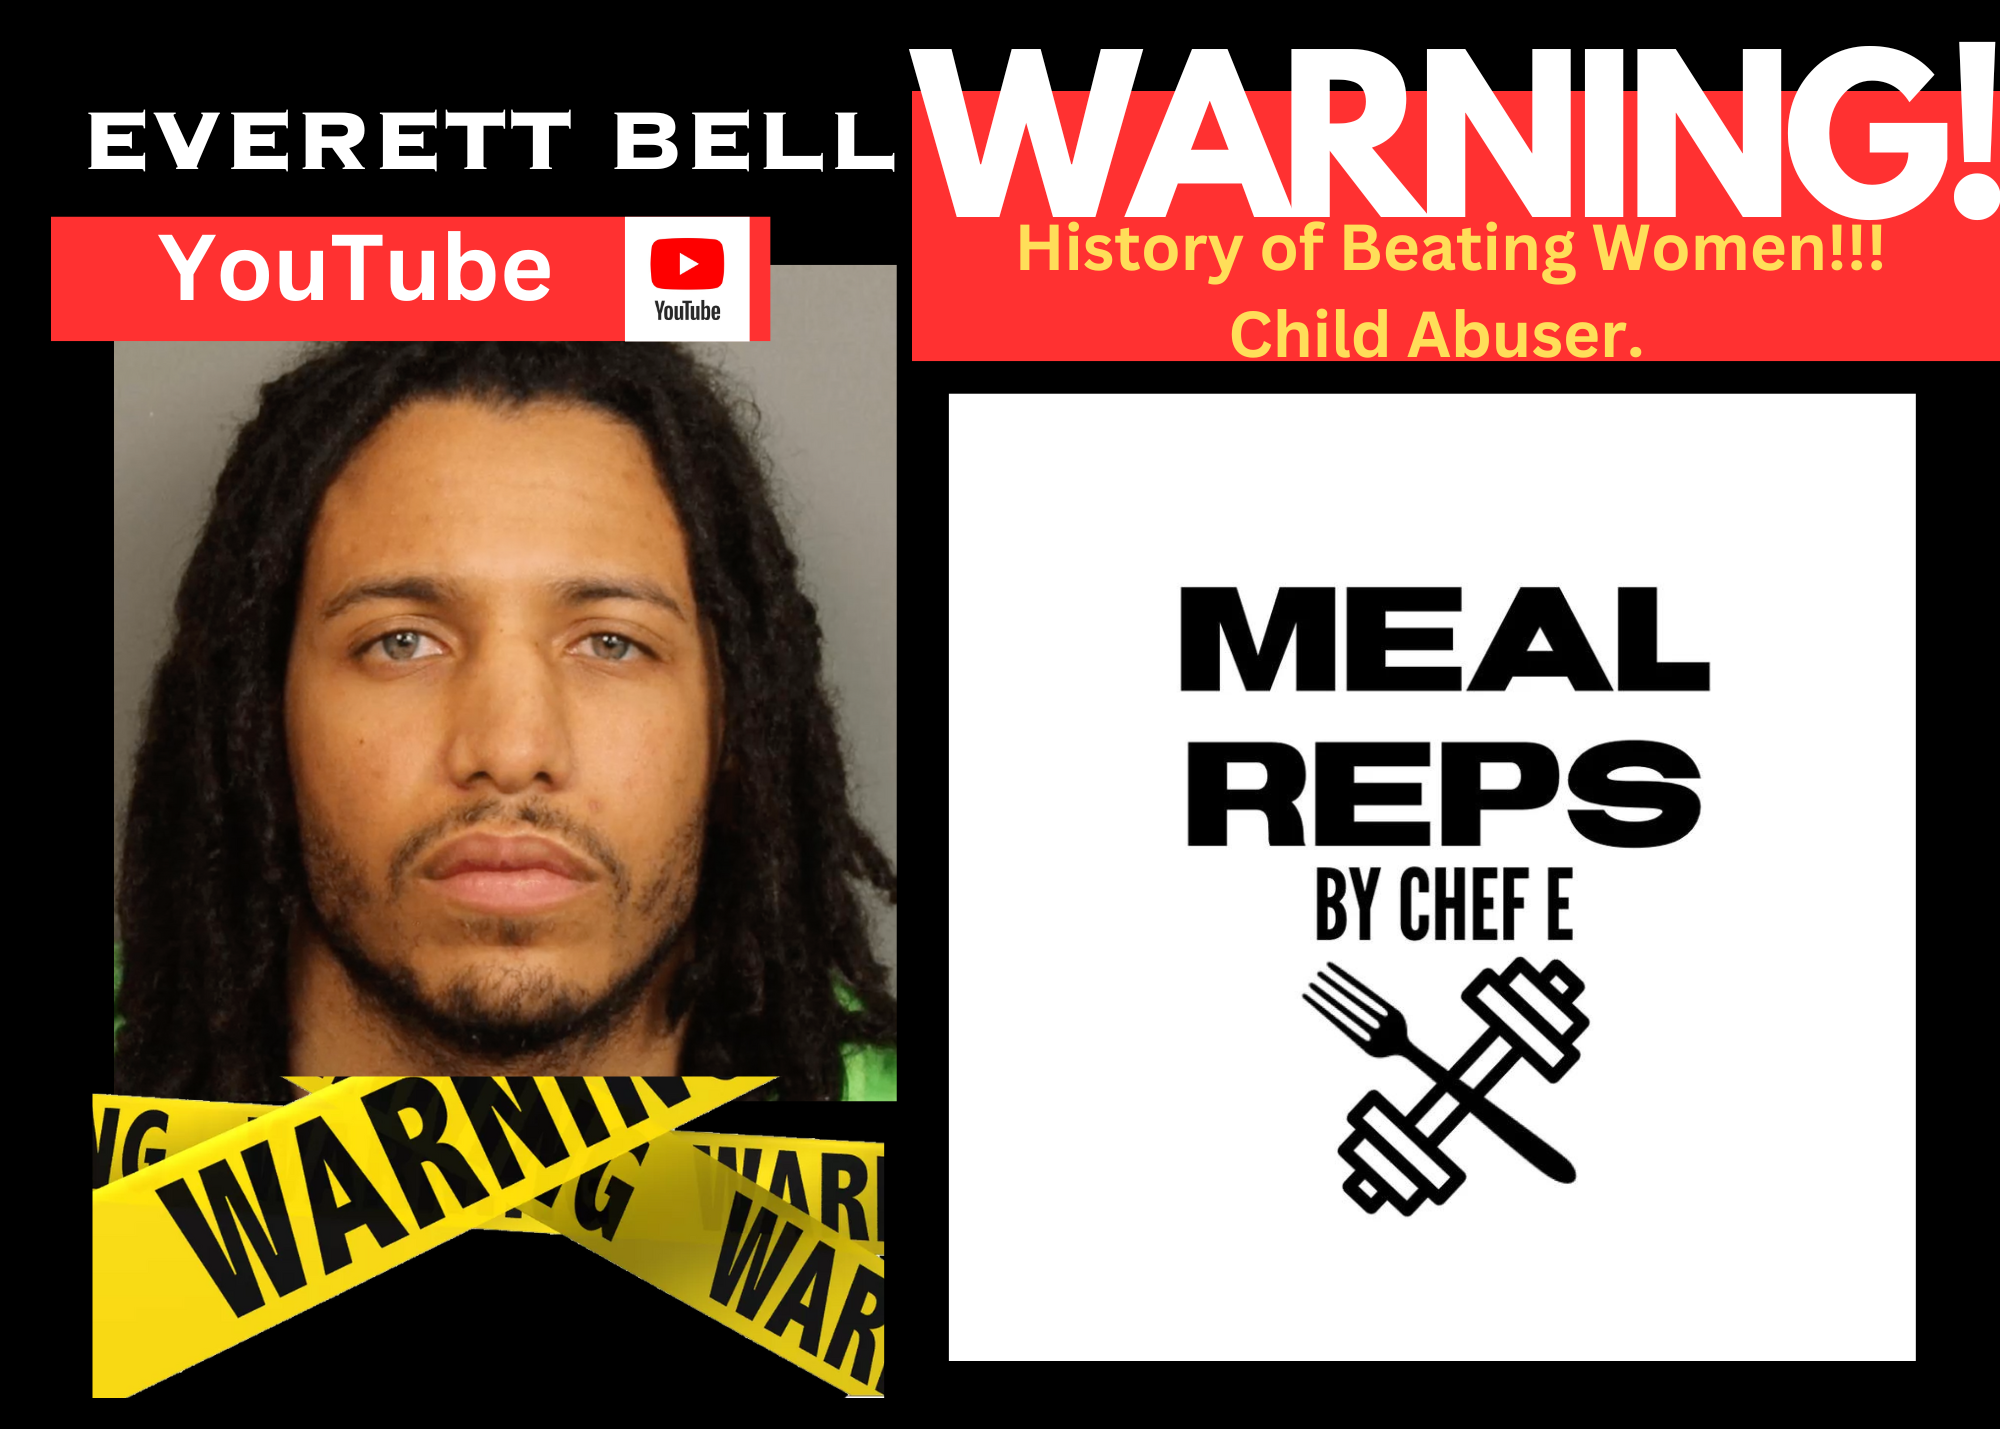 MEAL REPS by Chef E. WARNING TO ALL WOMEN!